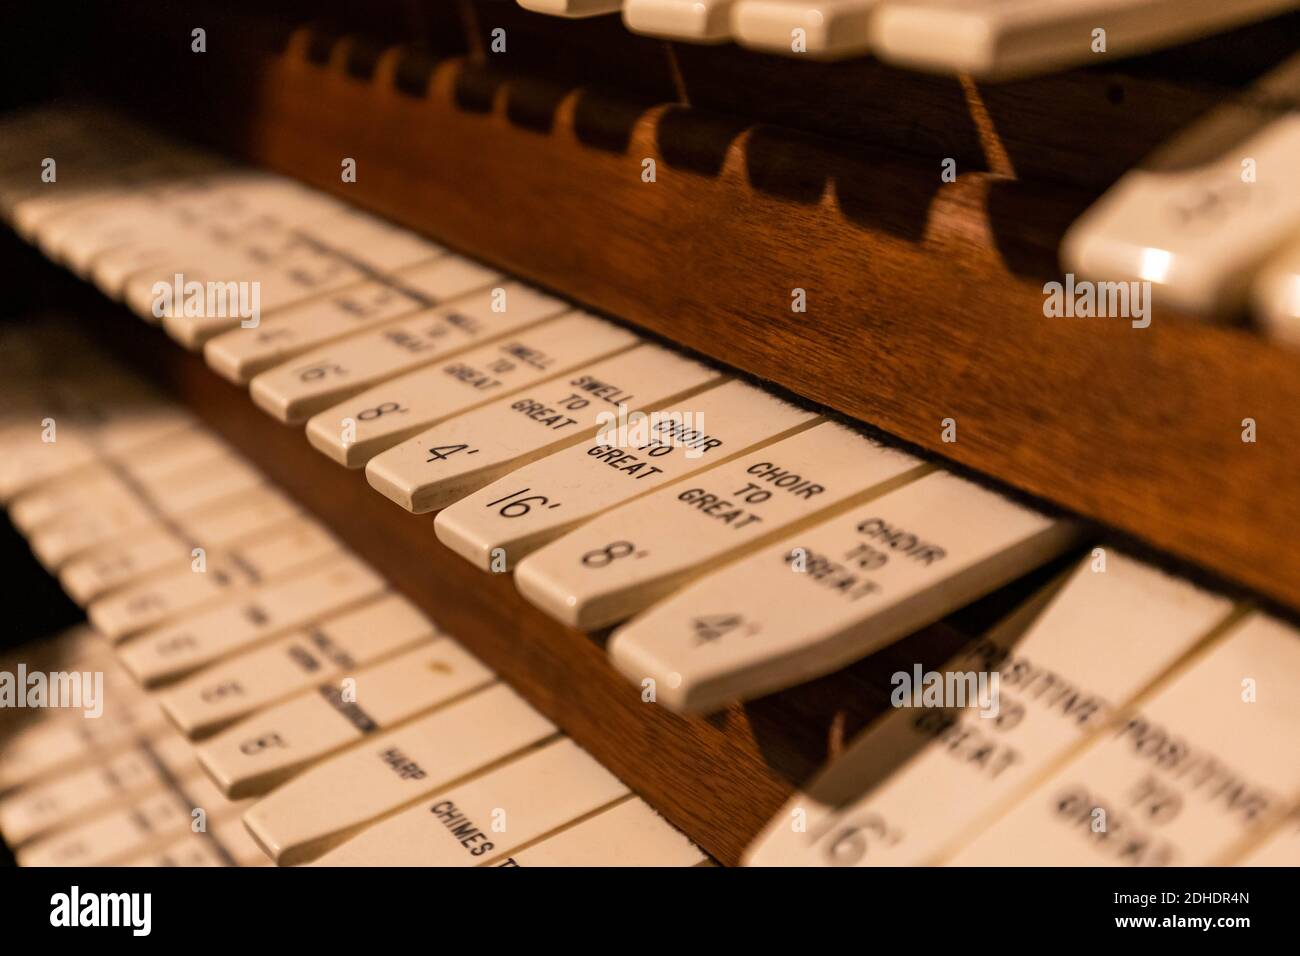 Pipe organ keyboard controls close up vintage style in english Stock Photo  - Alamy